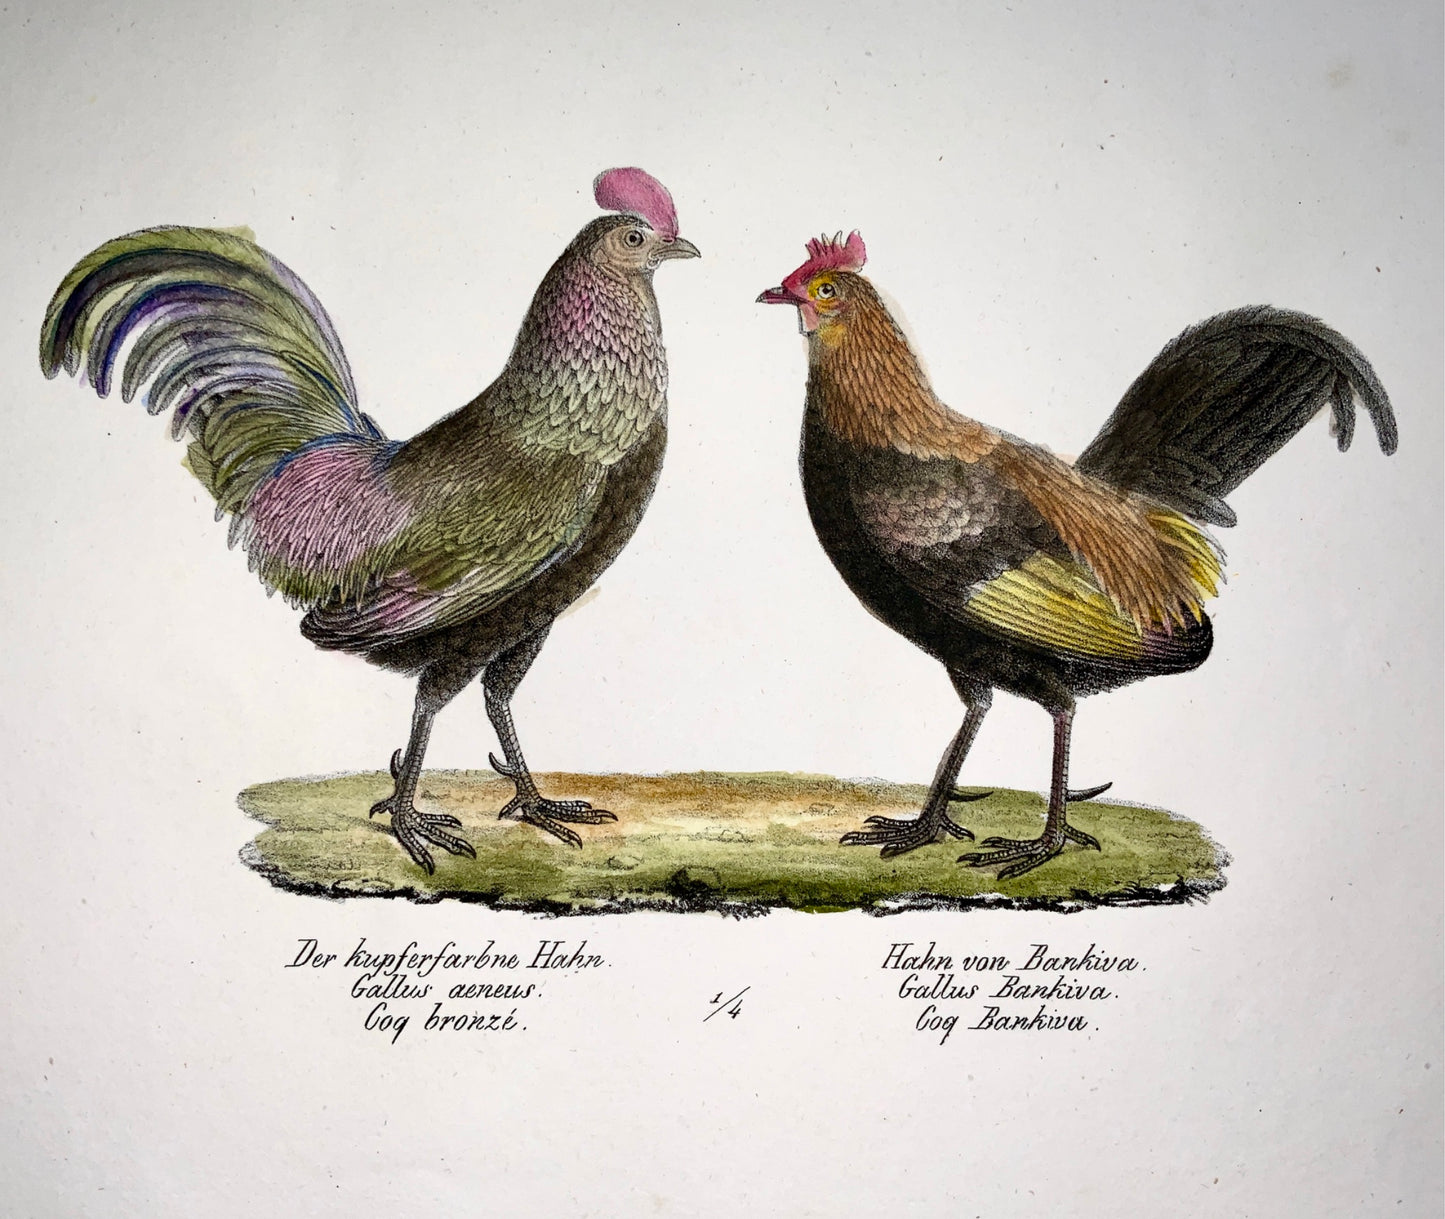 1830 POULTRY Cockerels Ornithology - Brodtmann hand coloured FOLIO lithograph